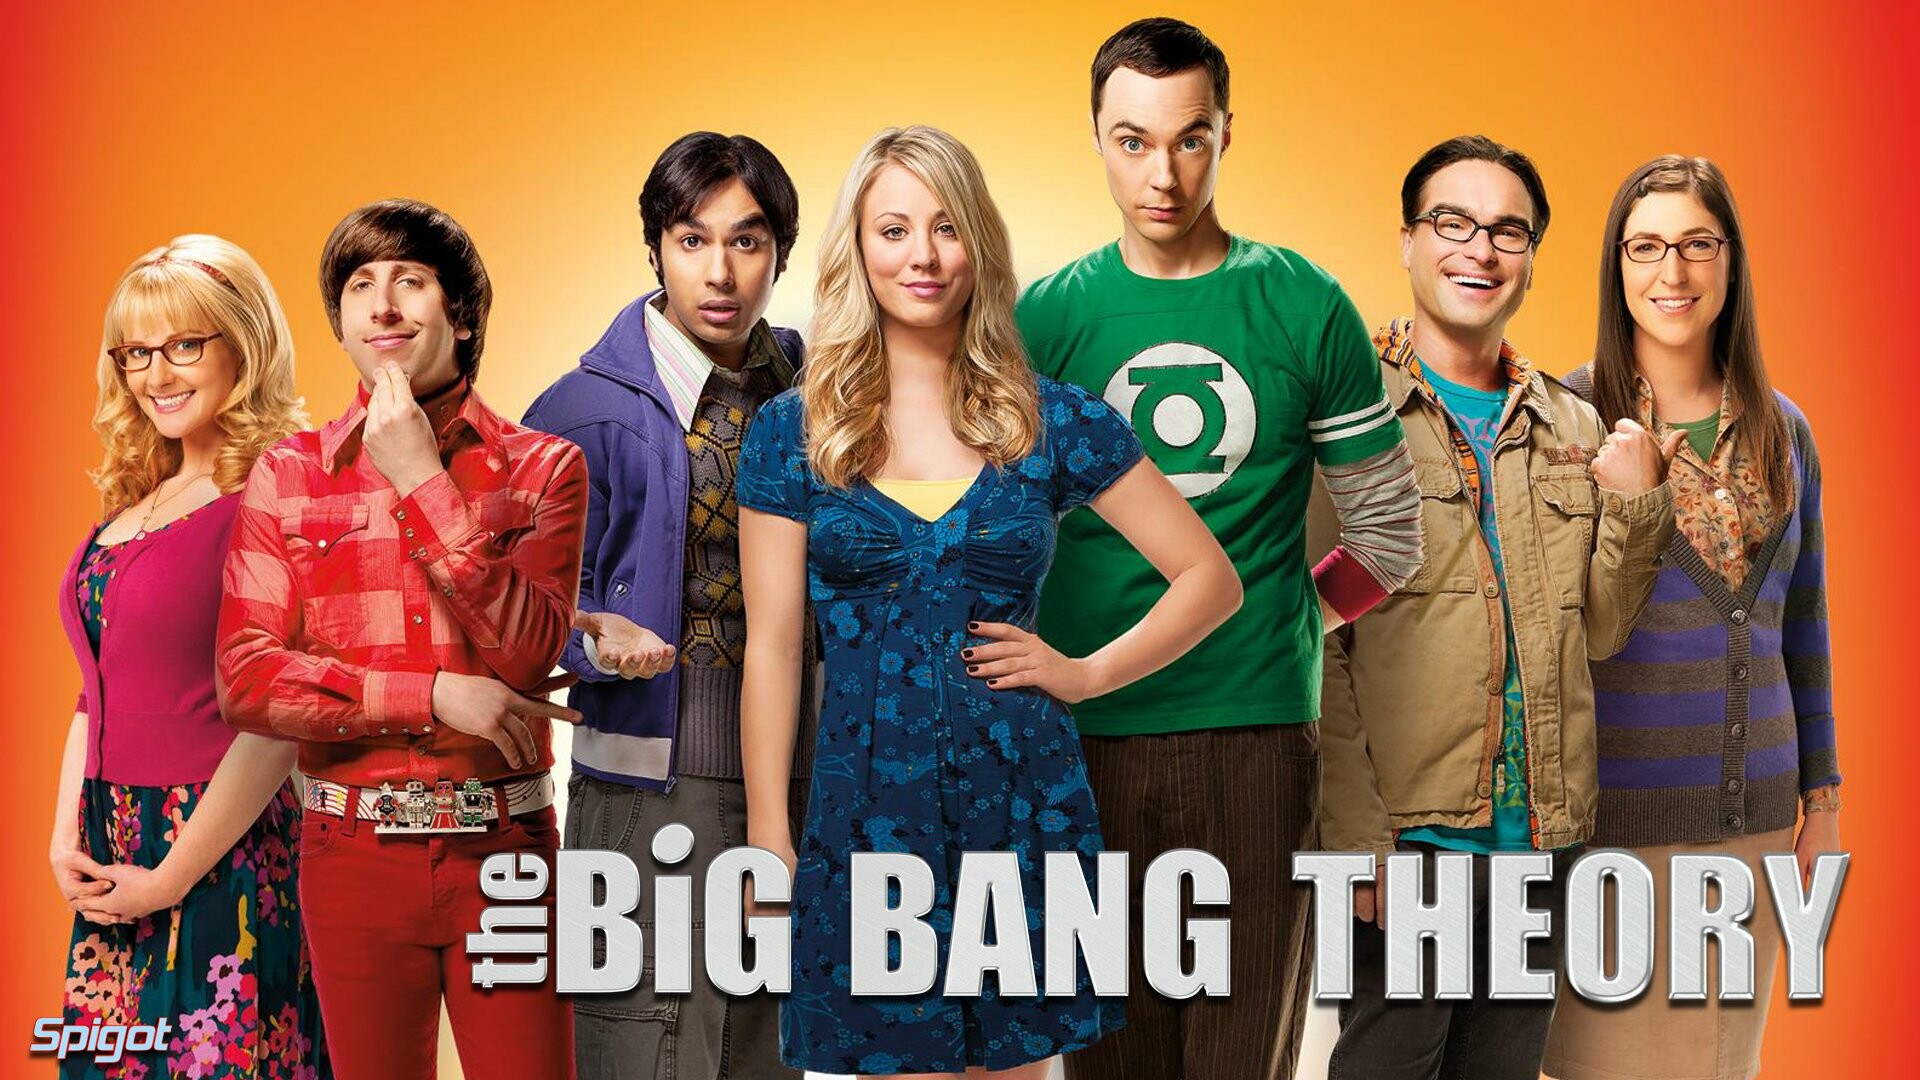 The Big Bang Theory, HD wallpapers, Background images, 1920x1080 Full HD Desktop